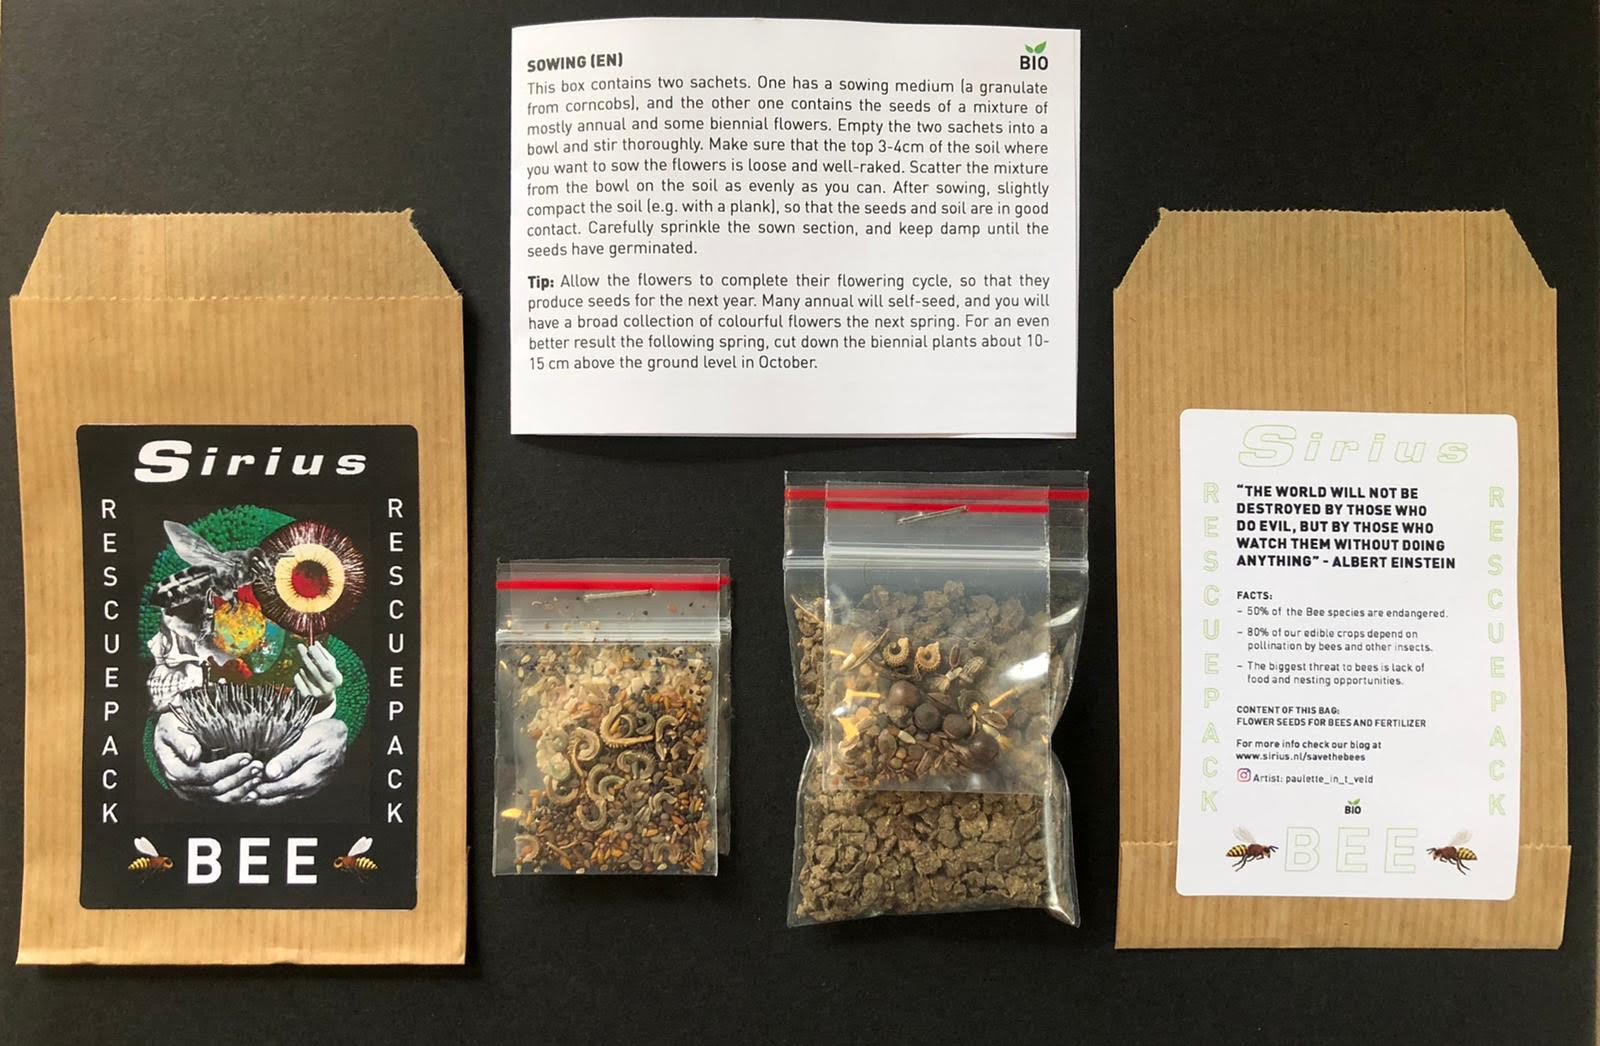 Bee Rescuepack Instructions